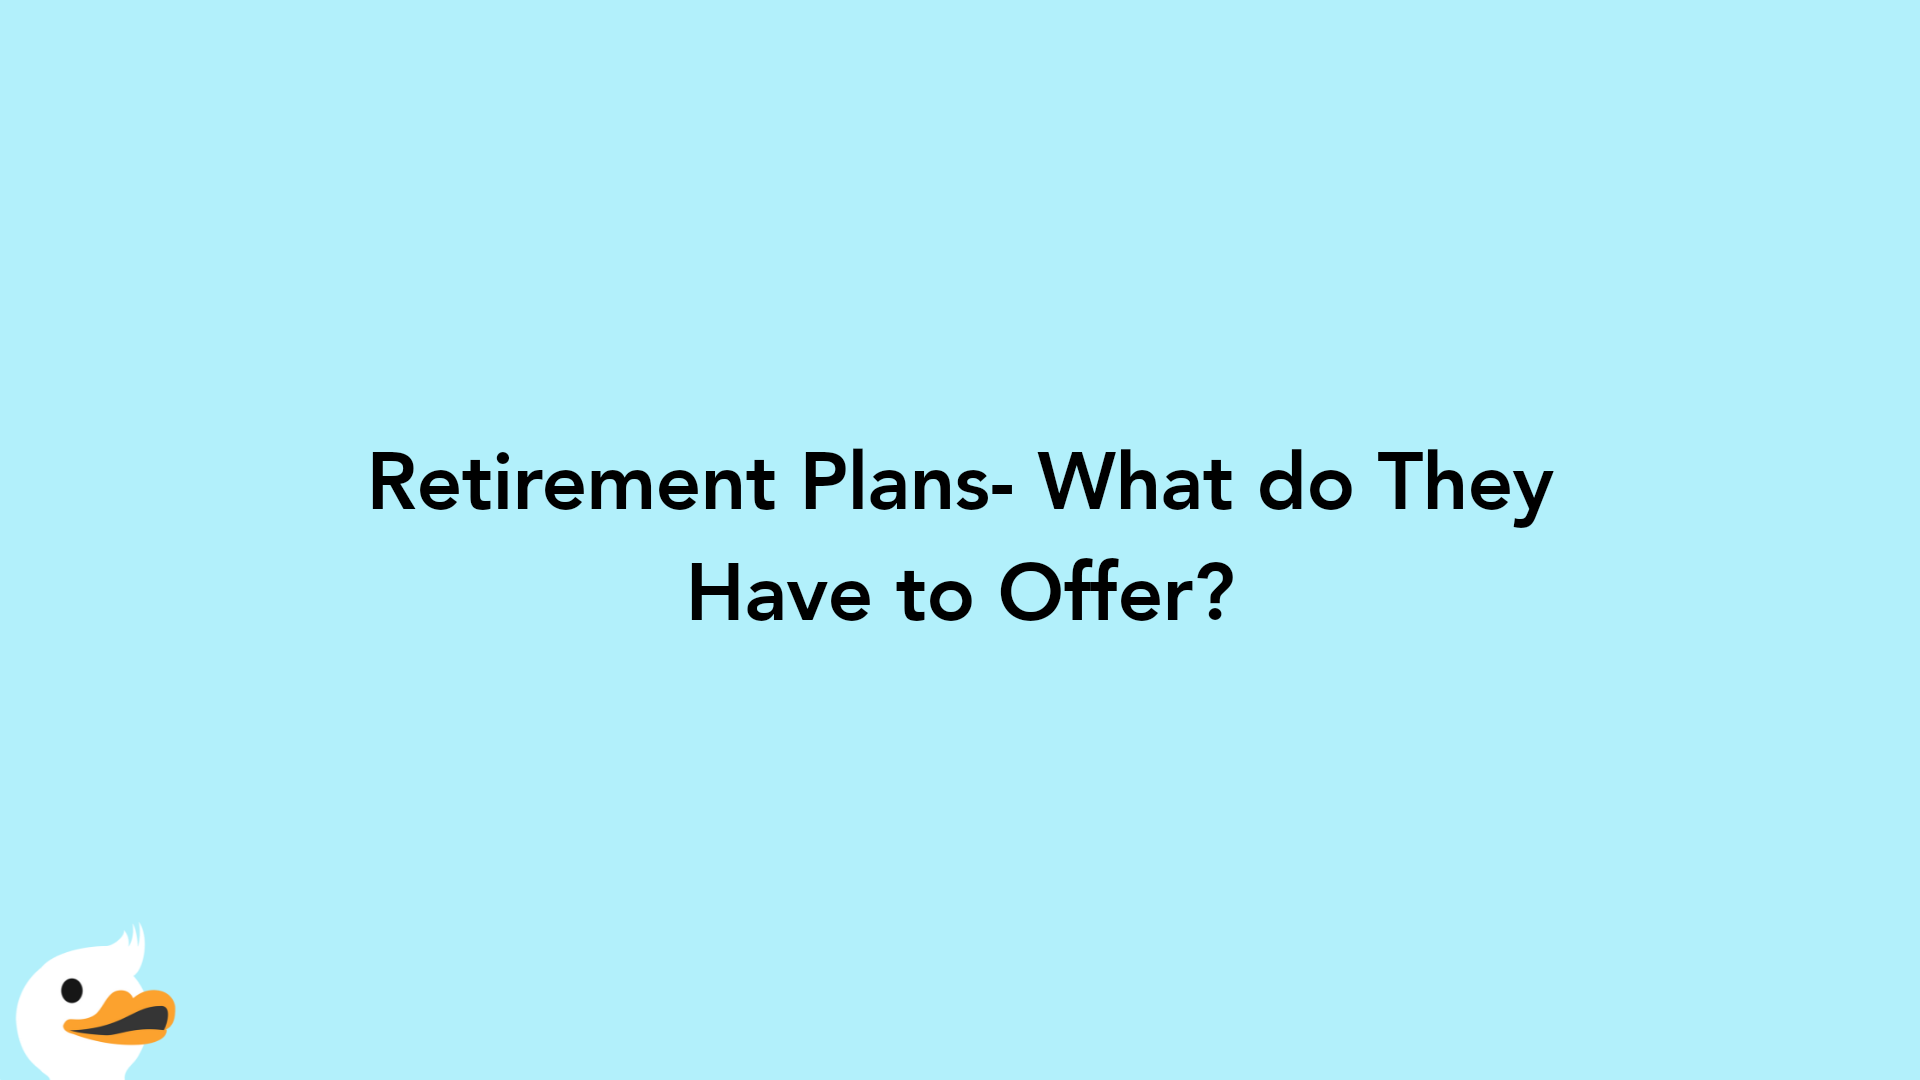 Retirement Plans- What do They Have to Offer?